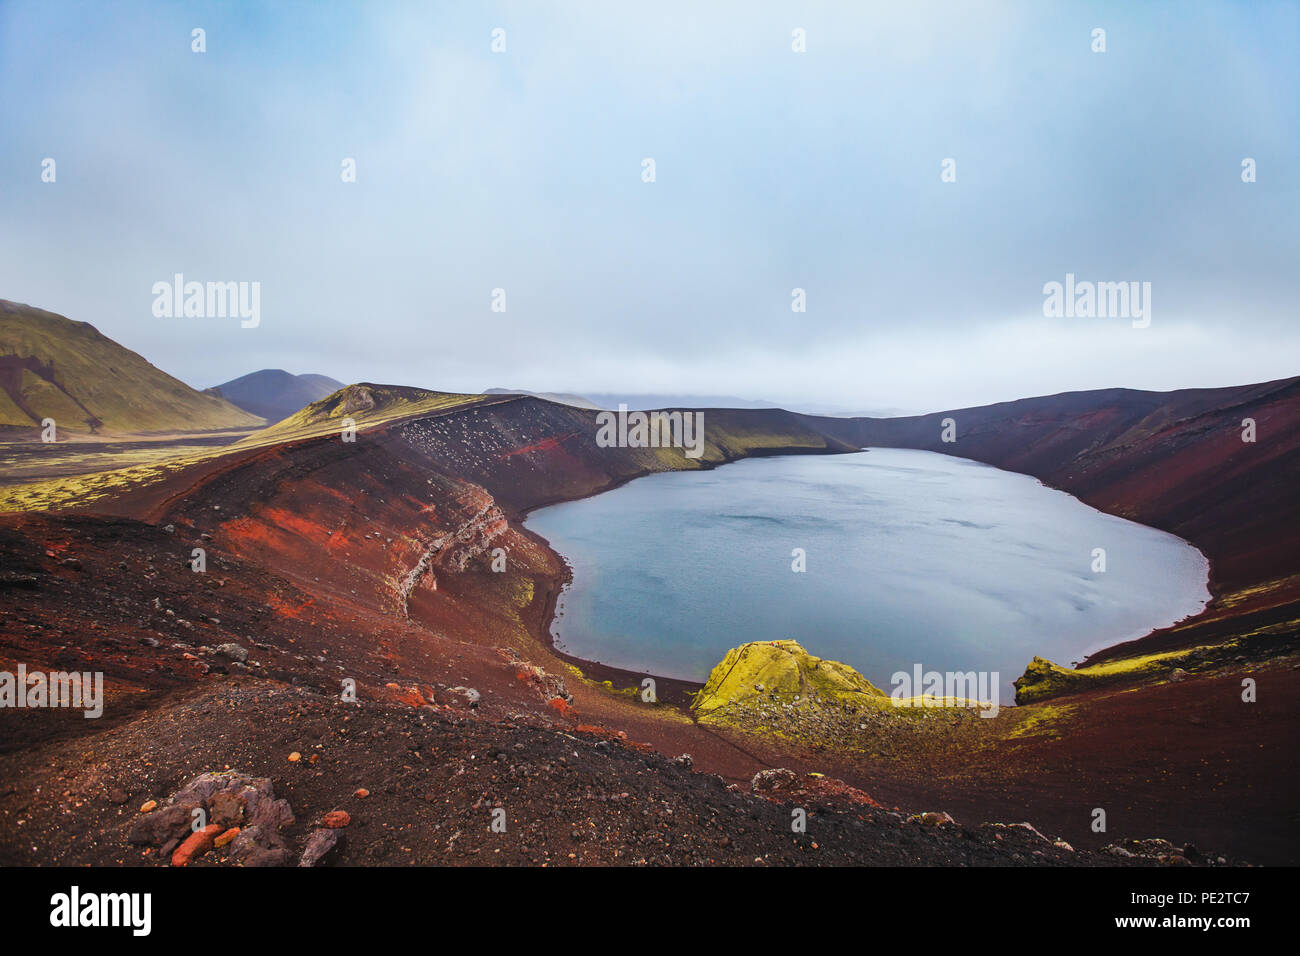 moon landscape with red crater in Iceland, Ljotipollur Lake in volcanic mountains of Landmannalaugar, beautiful scenic nature of highlands Stock Photo